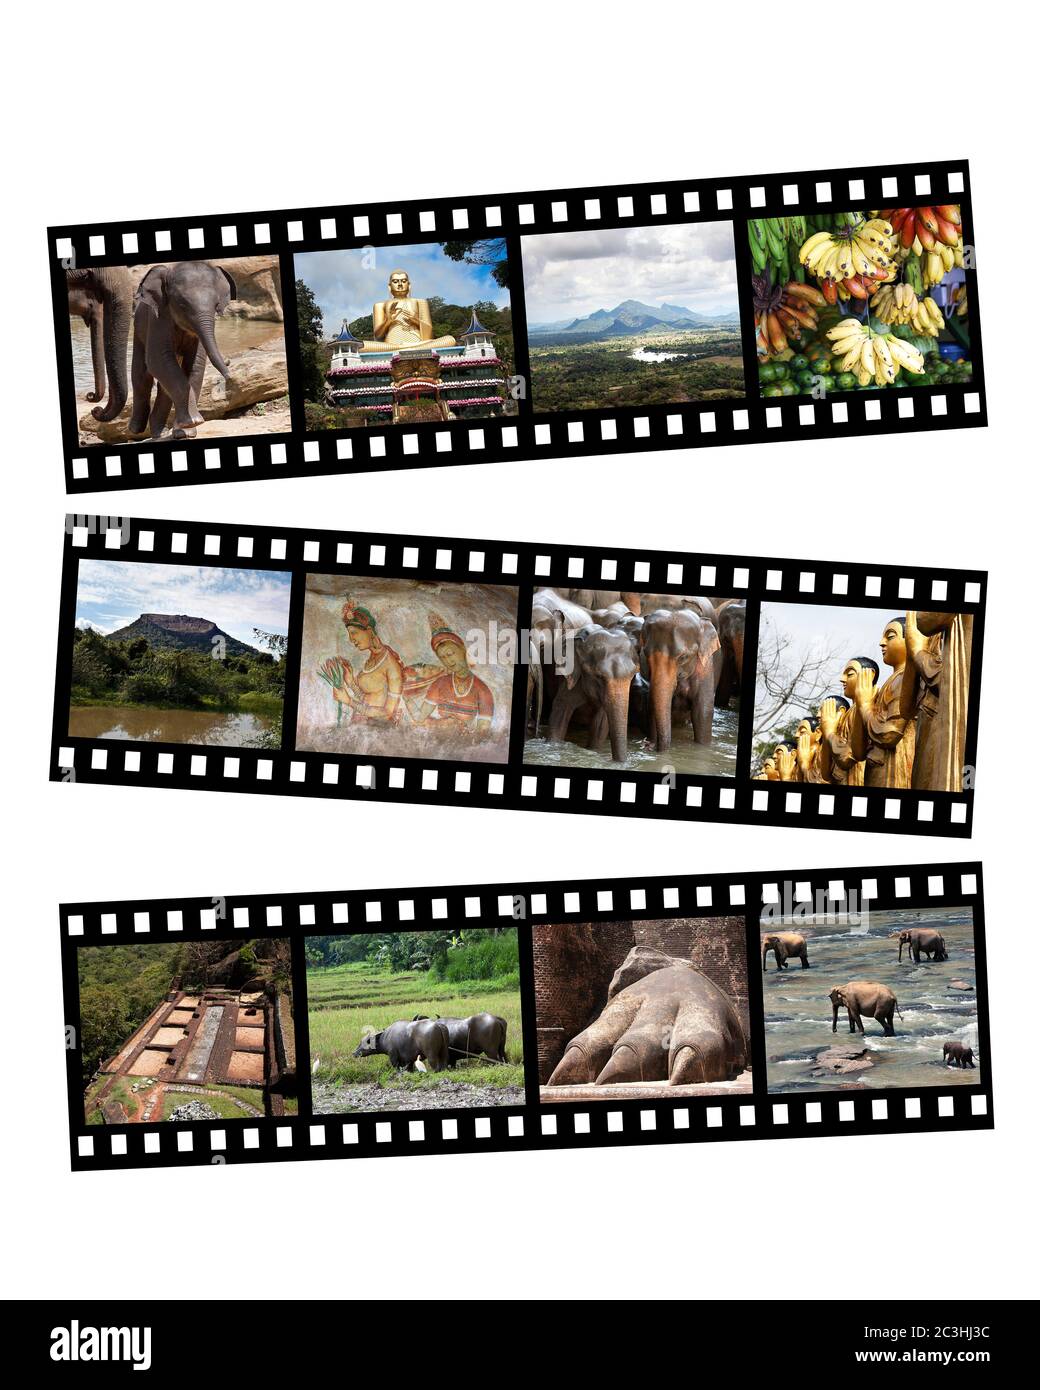 Images of Sri Lanka displayed on black and white film strips, isolated on white. Stock Photo